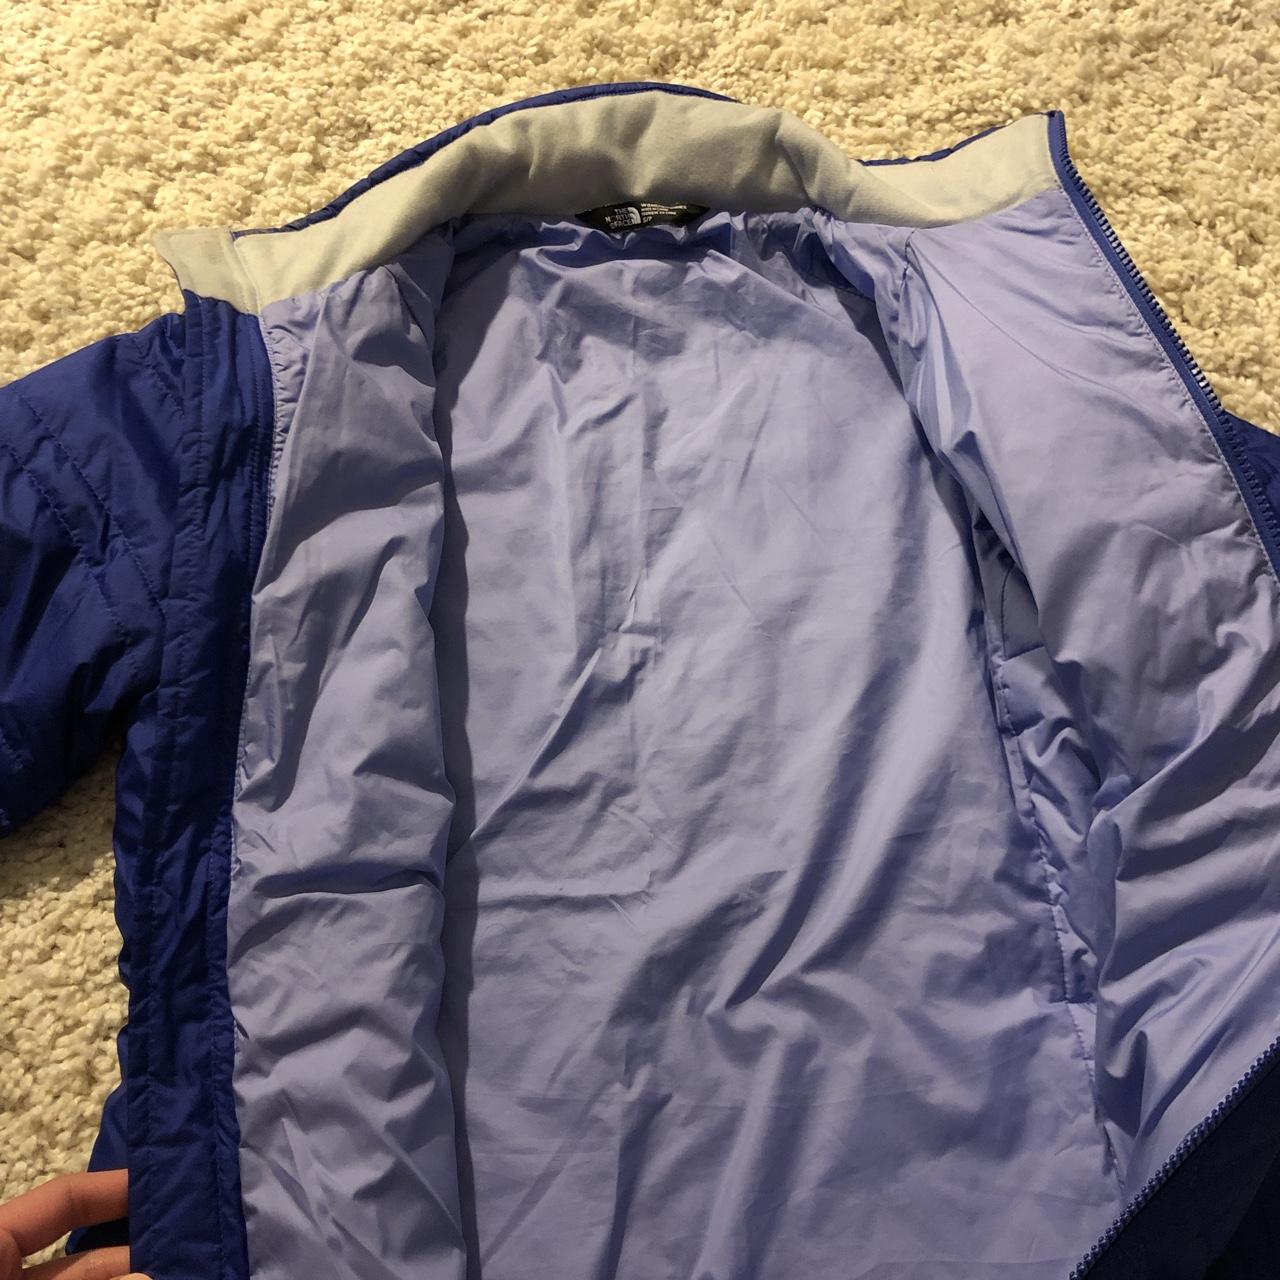 The North Face Women's Jacket | Depop